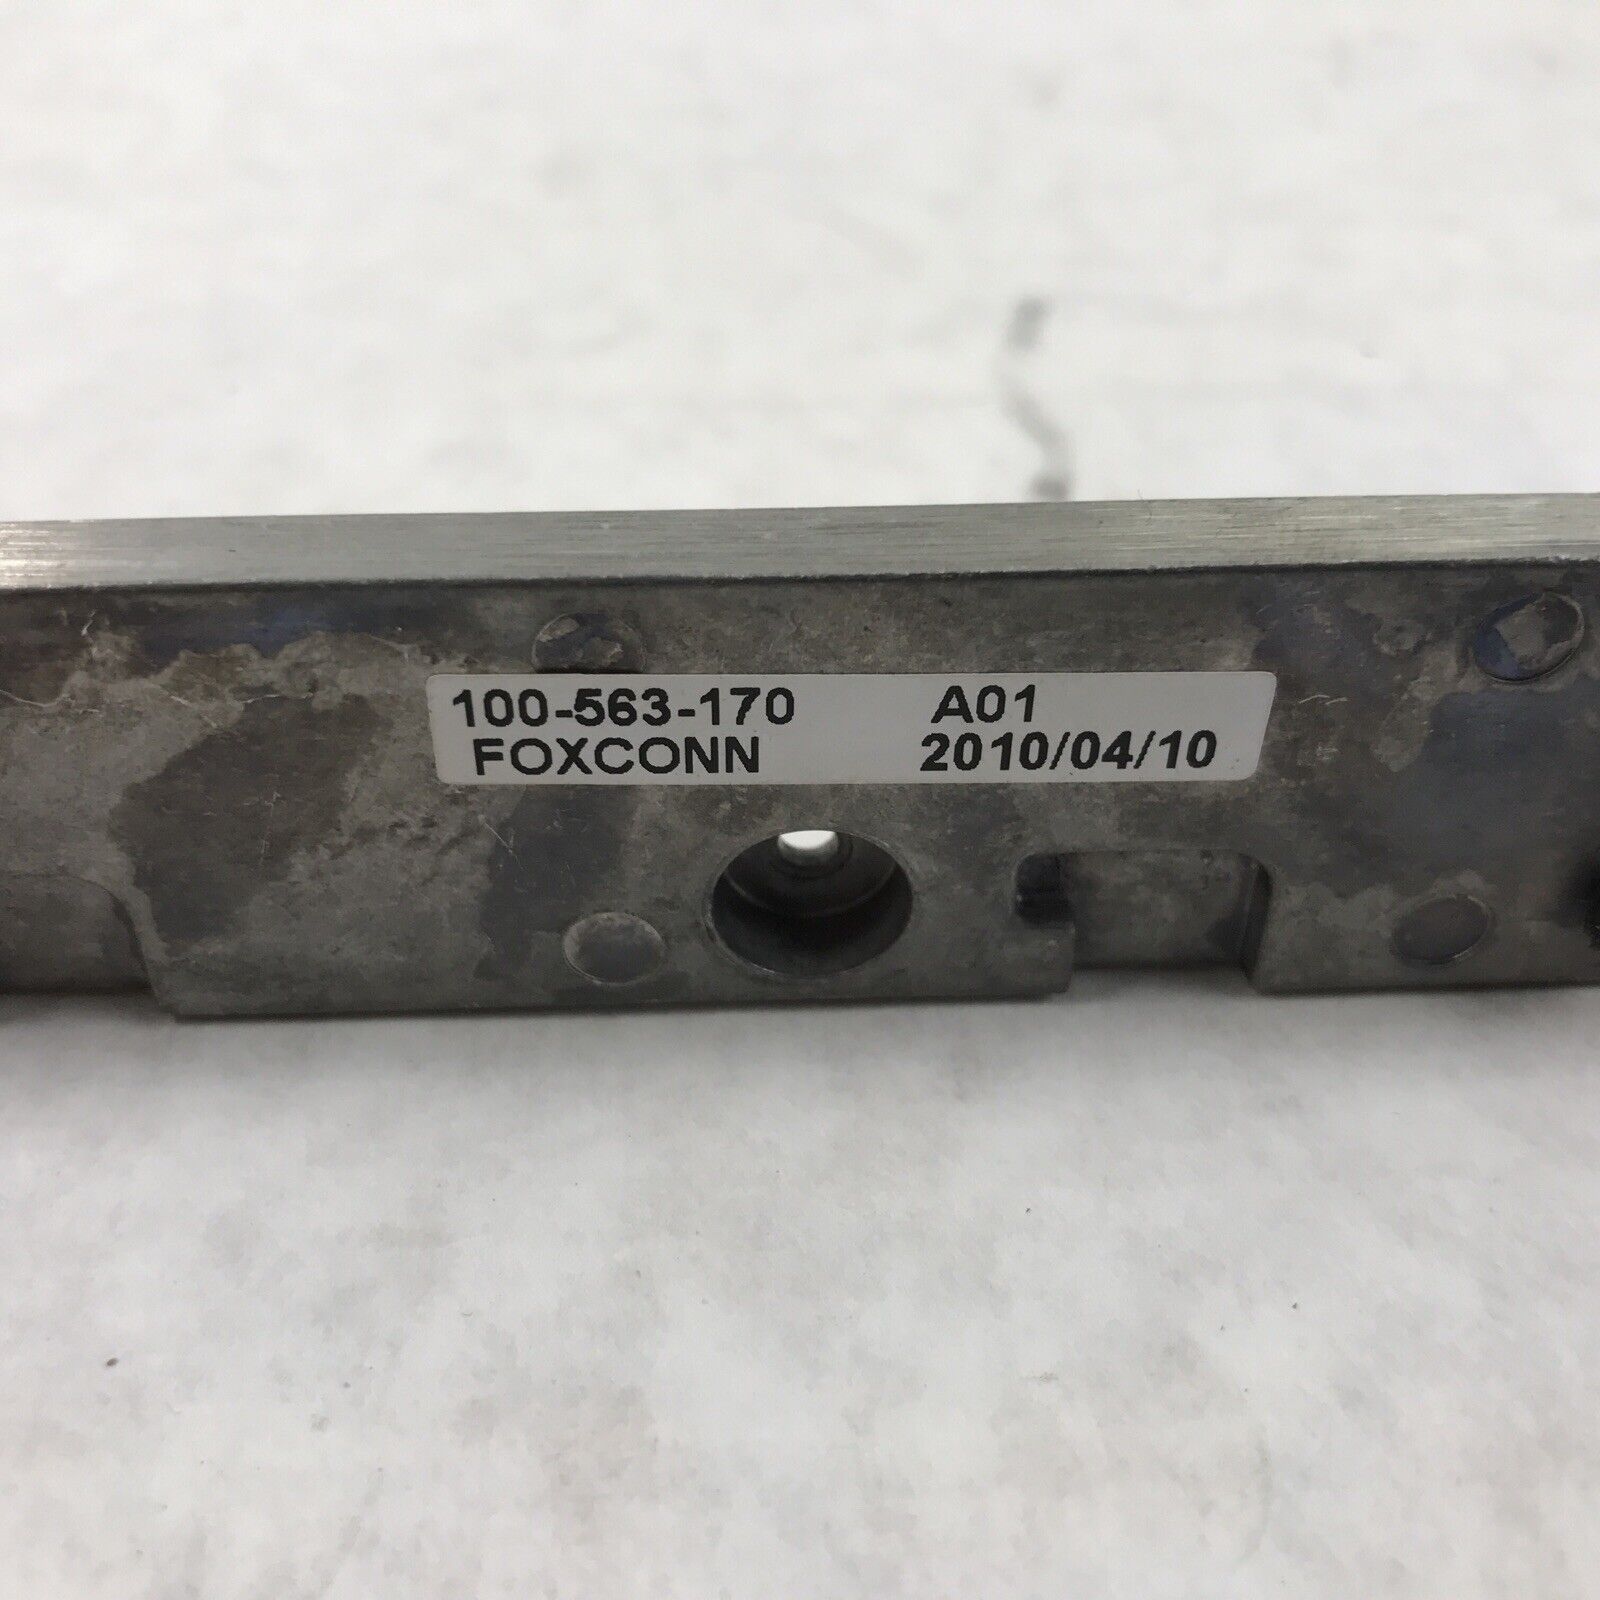 Foxconn 005049033 059C23 Hard Drive Caddy (Lot of 4)